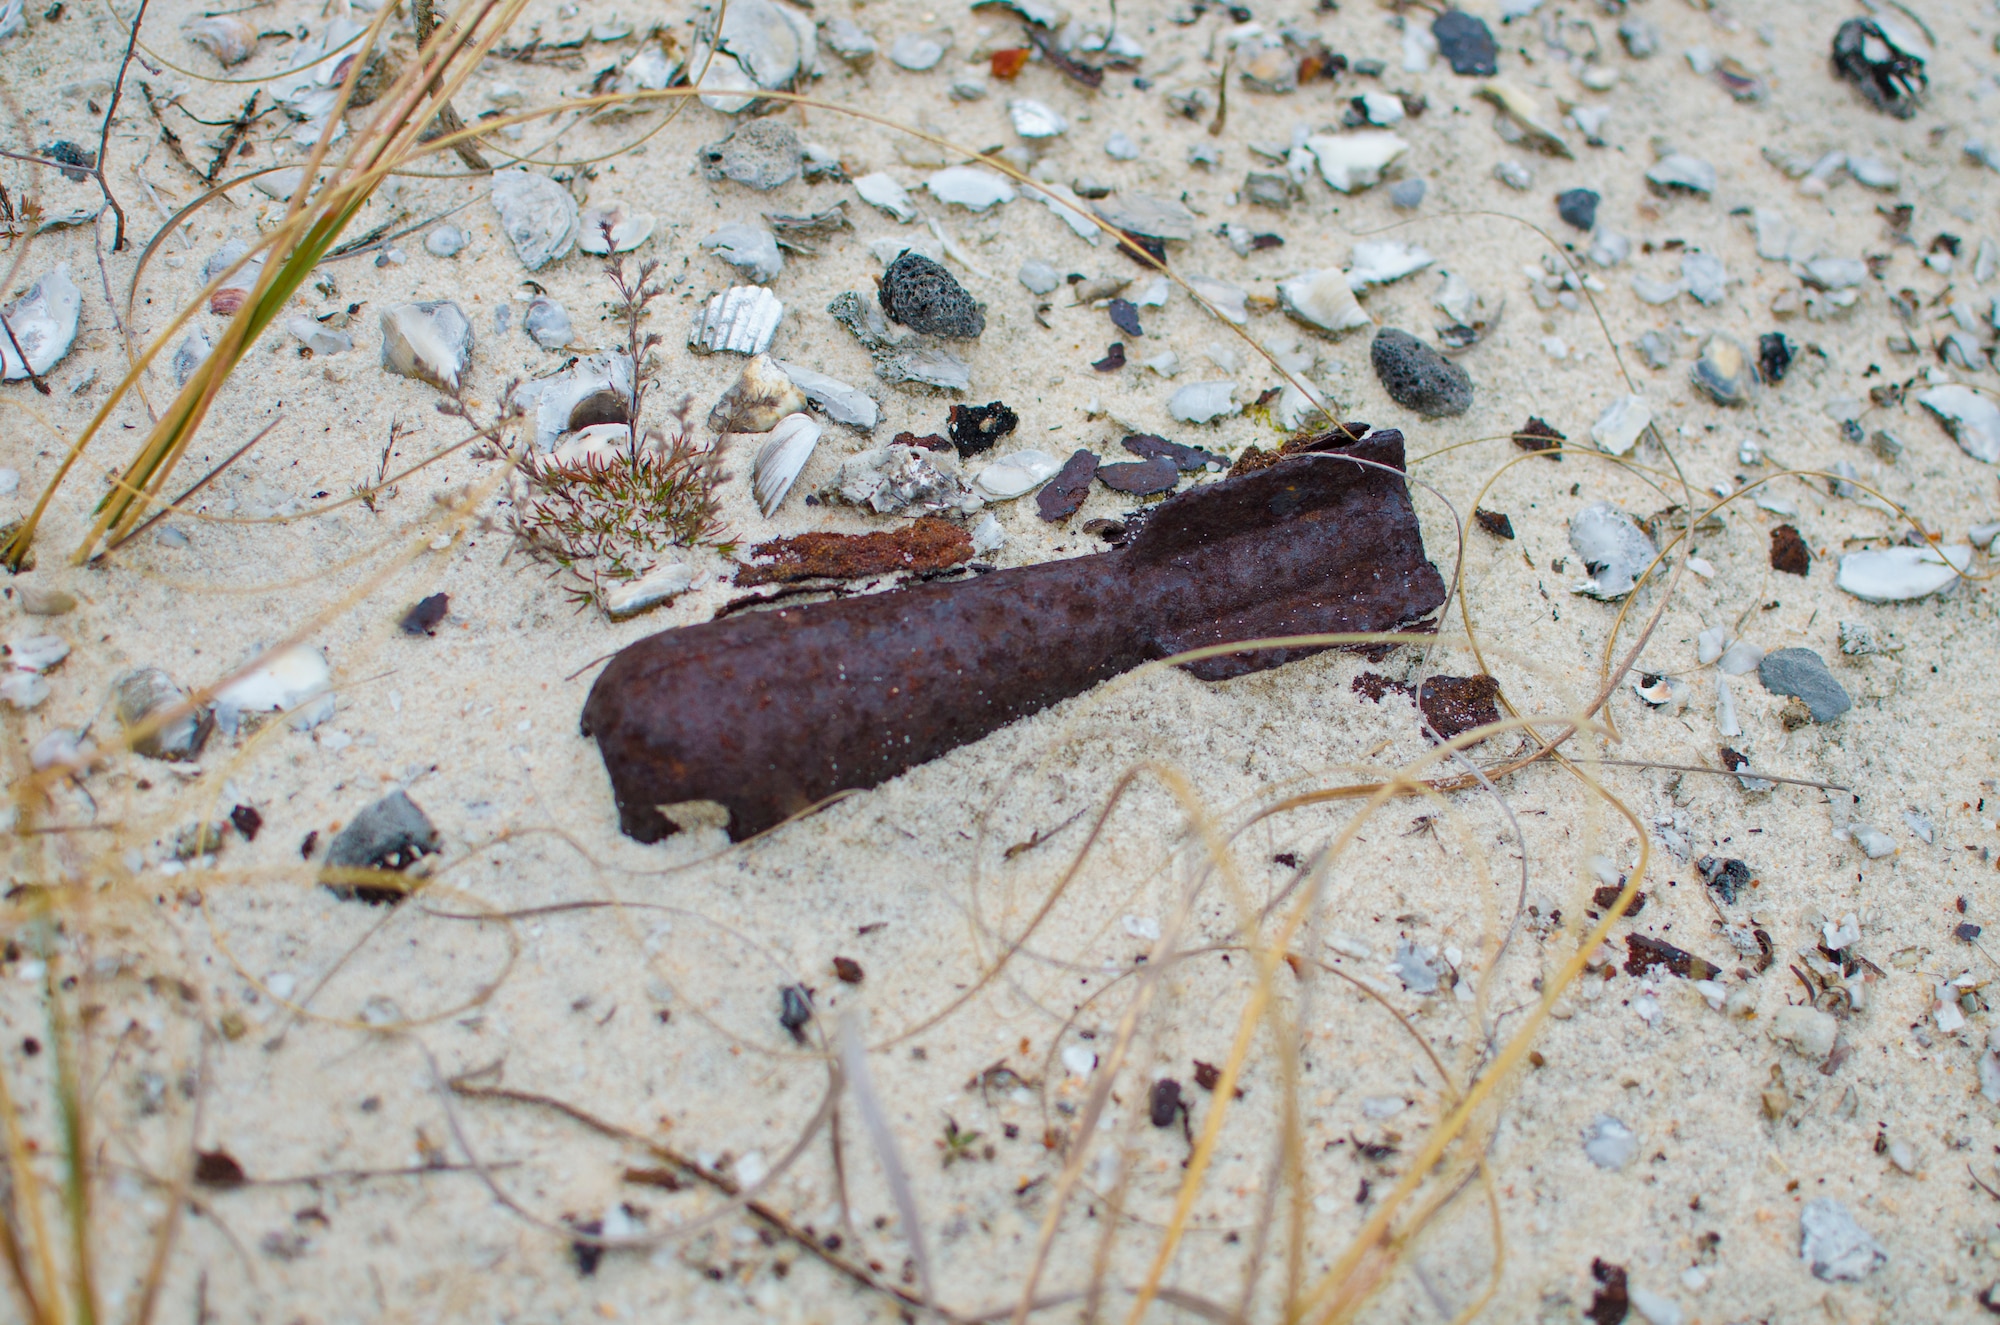 An unexploded ordnance sits in the sand at Perdido Key, Fla., March 12, 2014. UXOs washed ashore from military training, which took place off the coast. They can be extremely dangerous if disturbed. (U.S. Air Force photo/Staff Sgt. John Bainter)